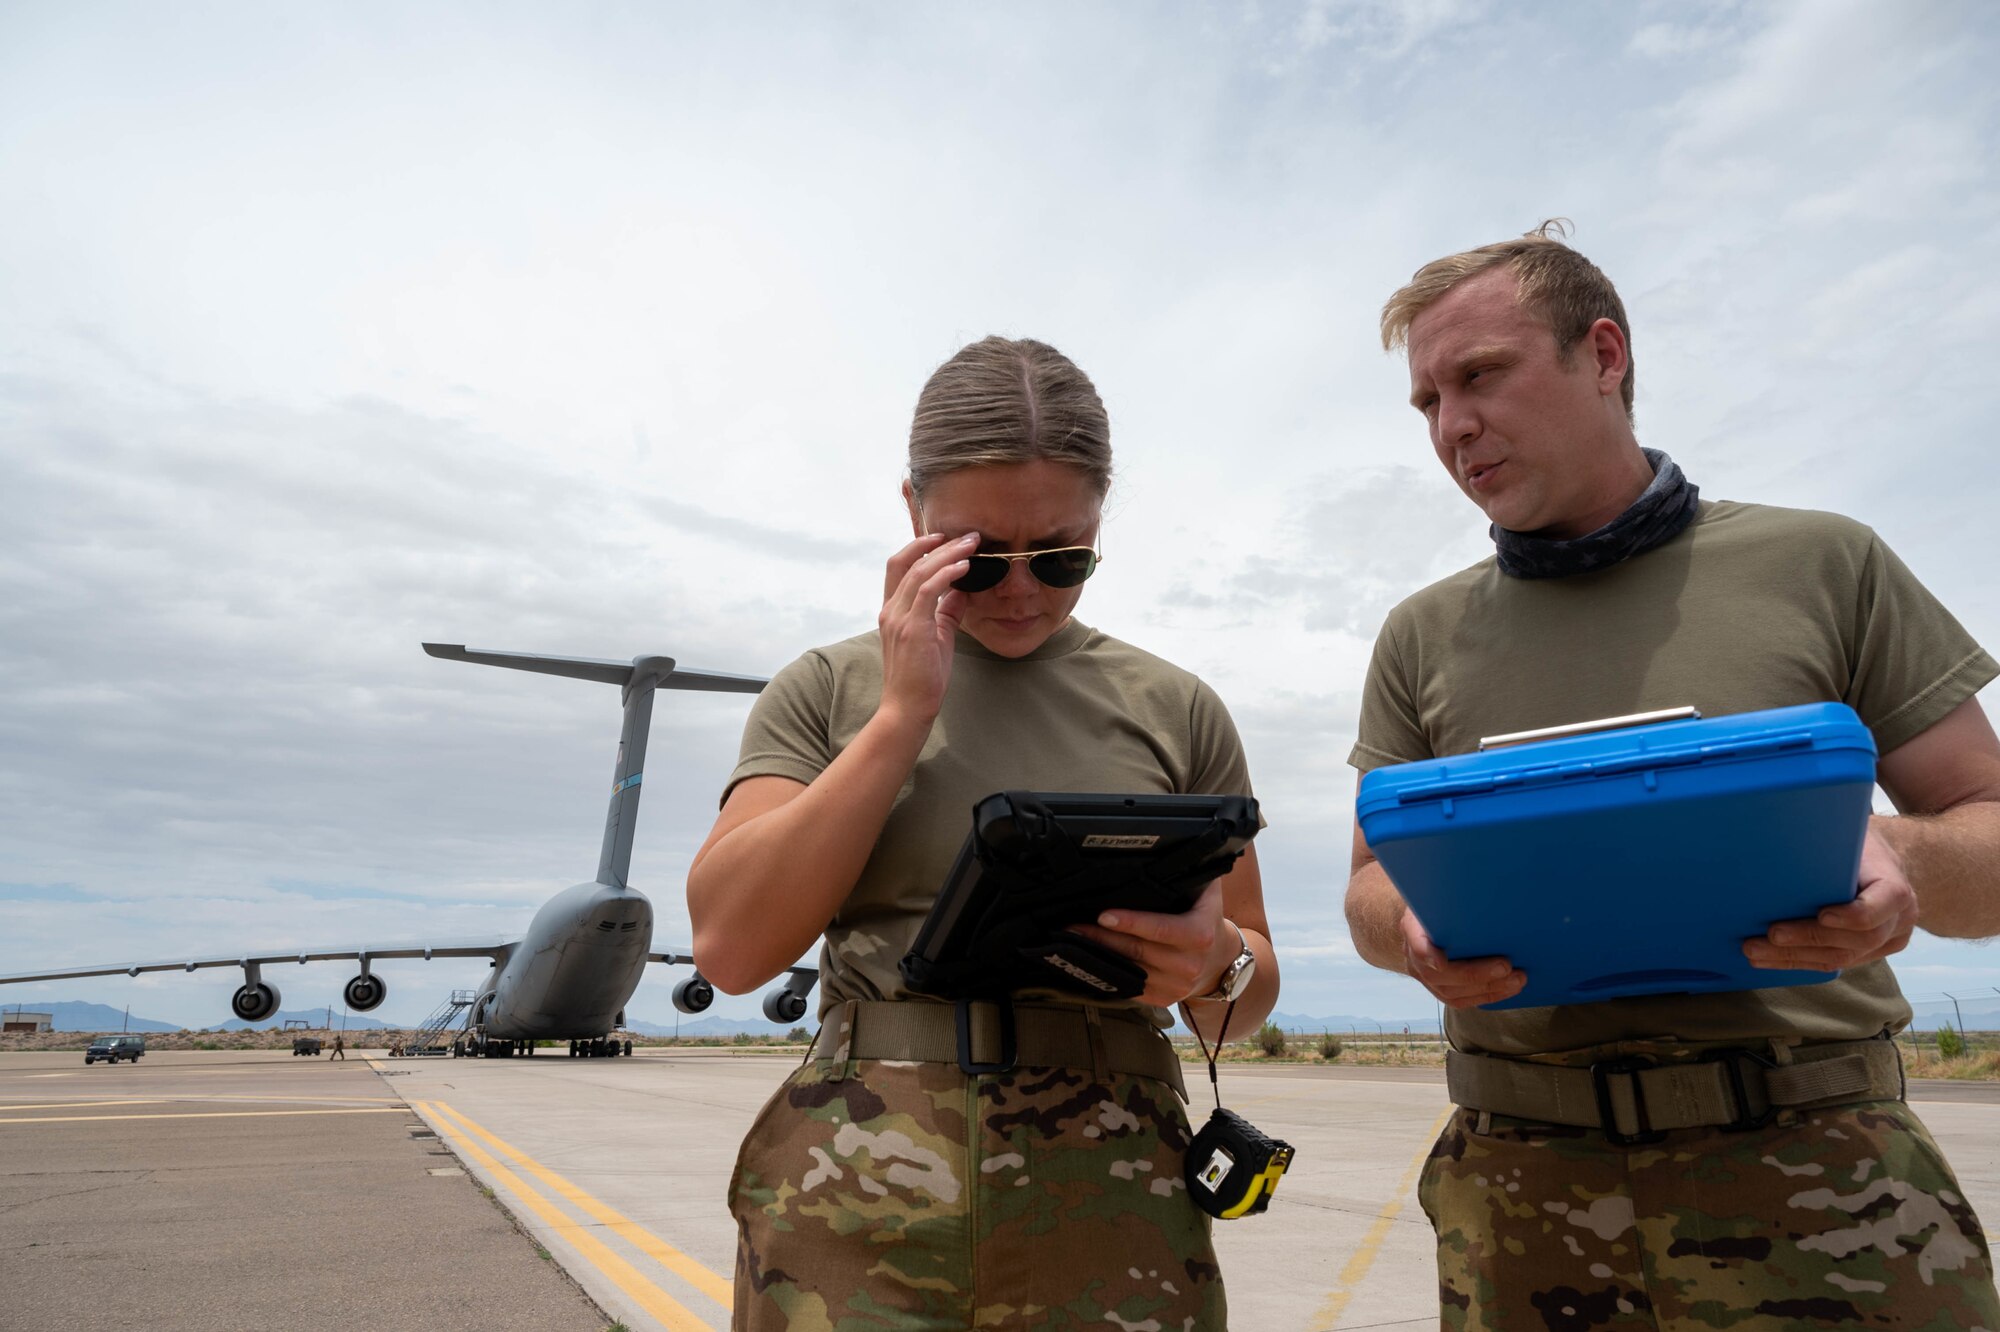 Airman 1st Class Rebecca Reimer, left, 9th Airlift Squadron student loadmaster, and Staff Sgt. Justin Thomas, 9th AS noncommissioned officer in charge of loadmaster training, discuss a joint inspection checklist during a Major Command Service Tail Trainer at Holloman Air Force Base, New Mexico, June 2, 2021. The 9th AS performs MSTTs to expedite upgrade and qualification training for C-5M loadmasters and flight engineers. Of the 350 tasks needed to be a fully qualified loadmaster, roughly half can be completed during an MSTT,  reducing training time by up to 35 days. (U.S. Air Force photo by Senior Airman Faith Schaefer)